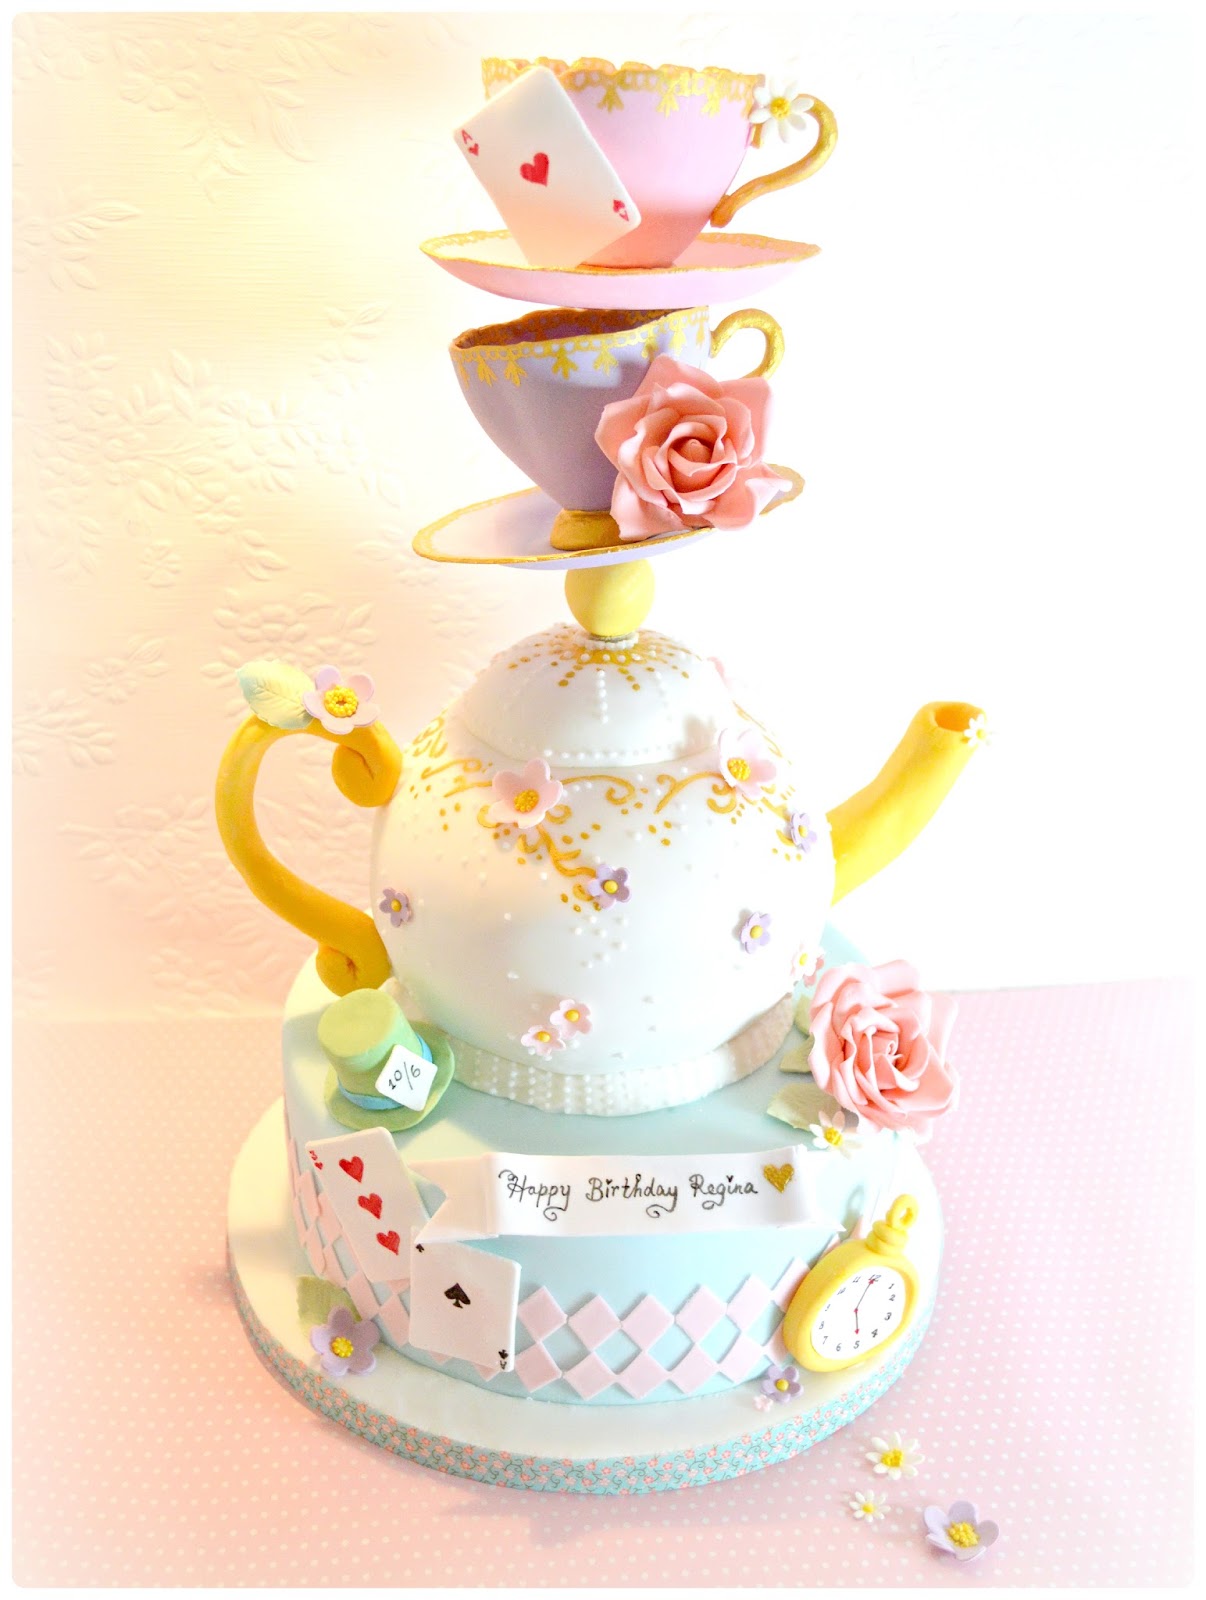 Discover more than 148 topsy turvy cake